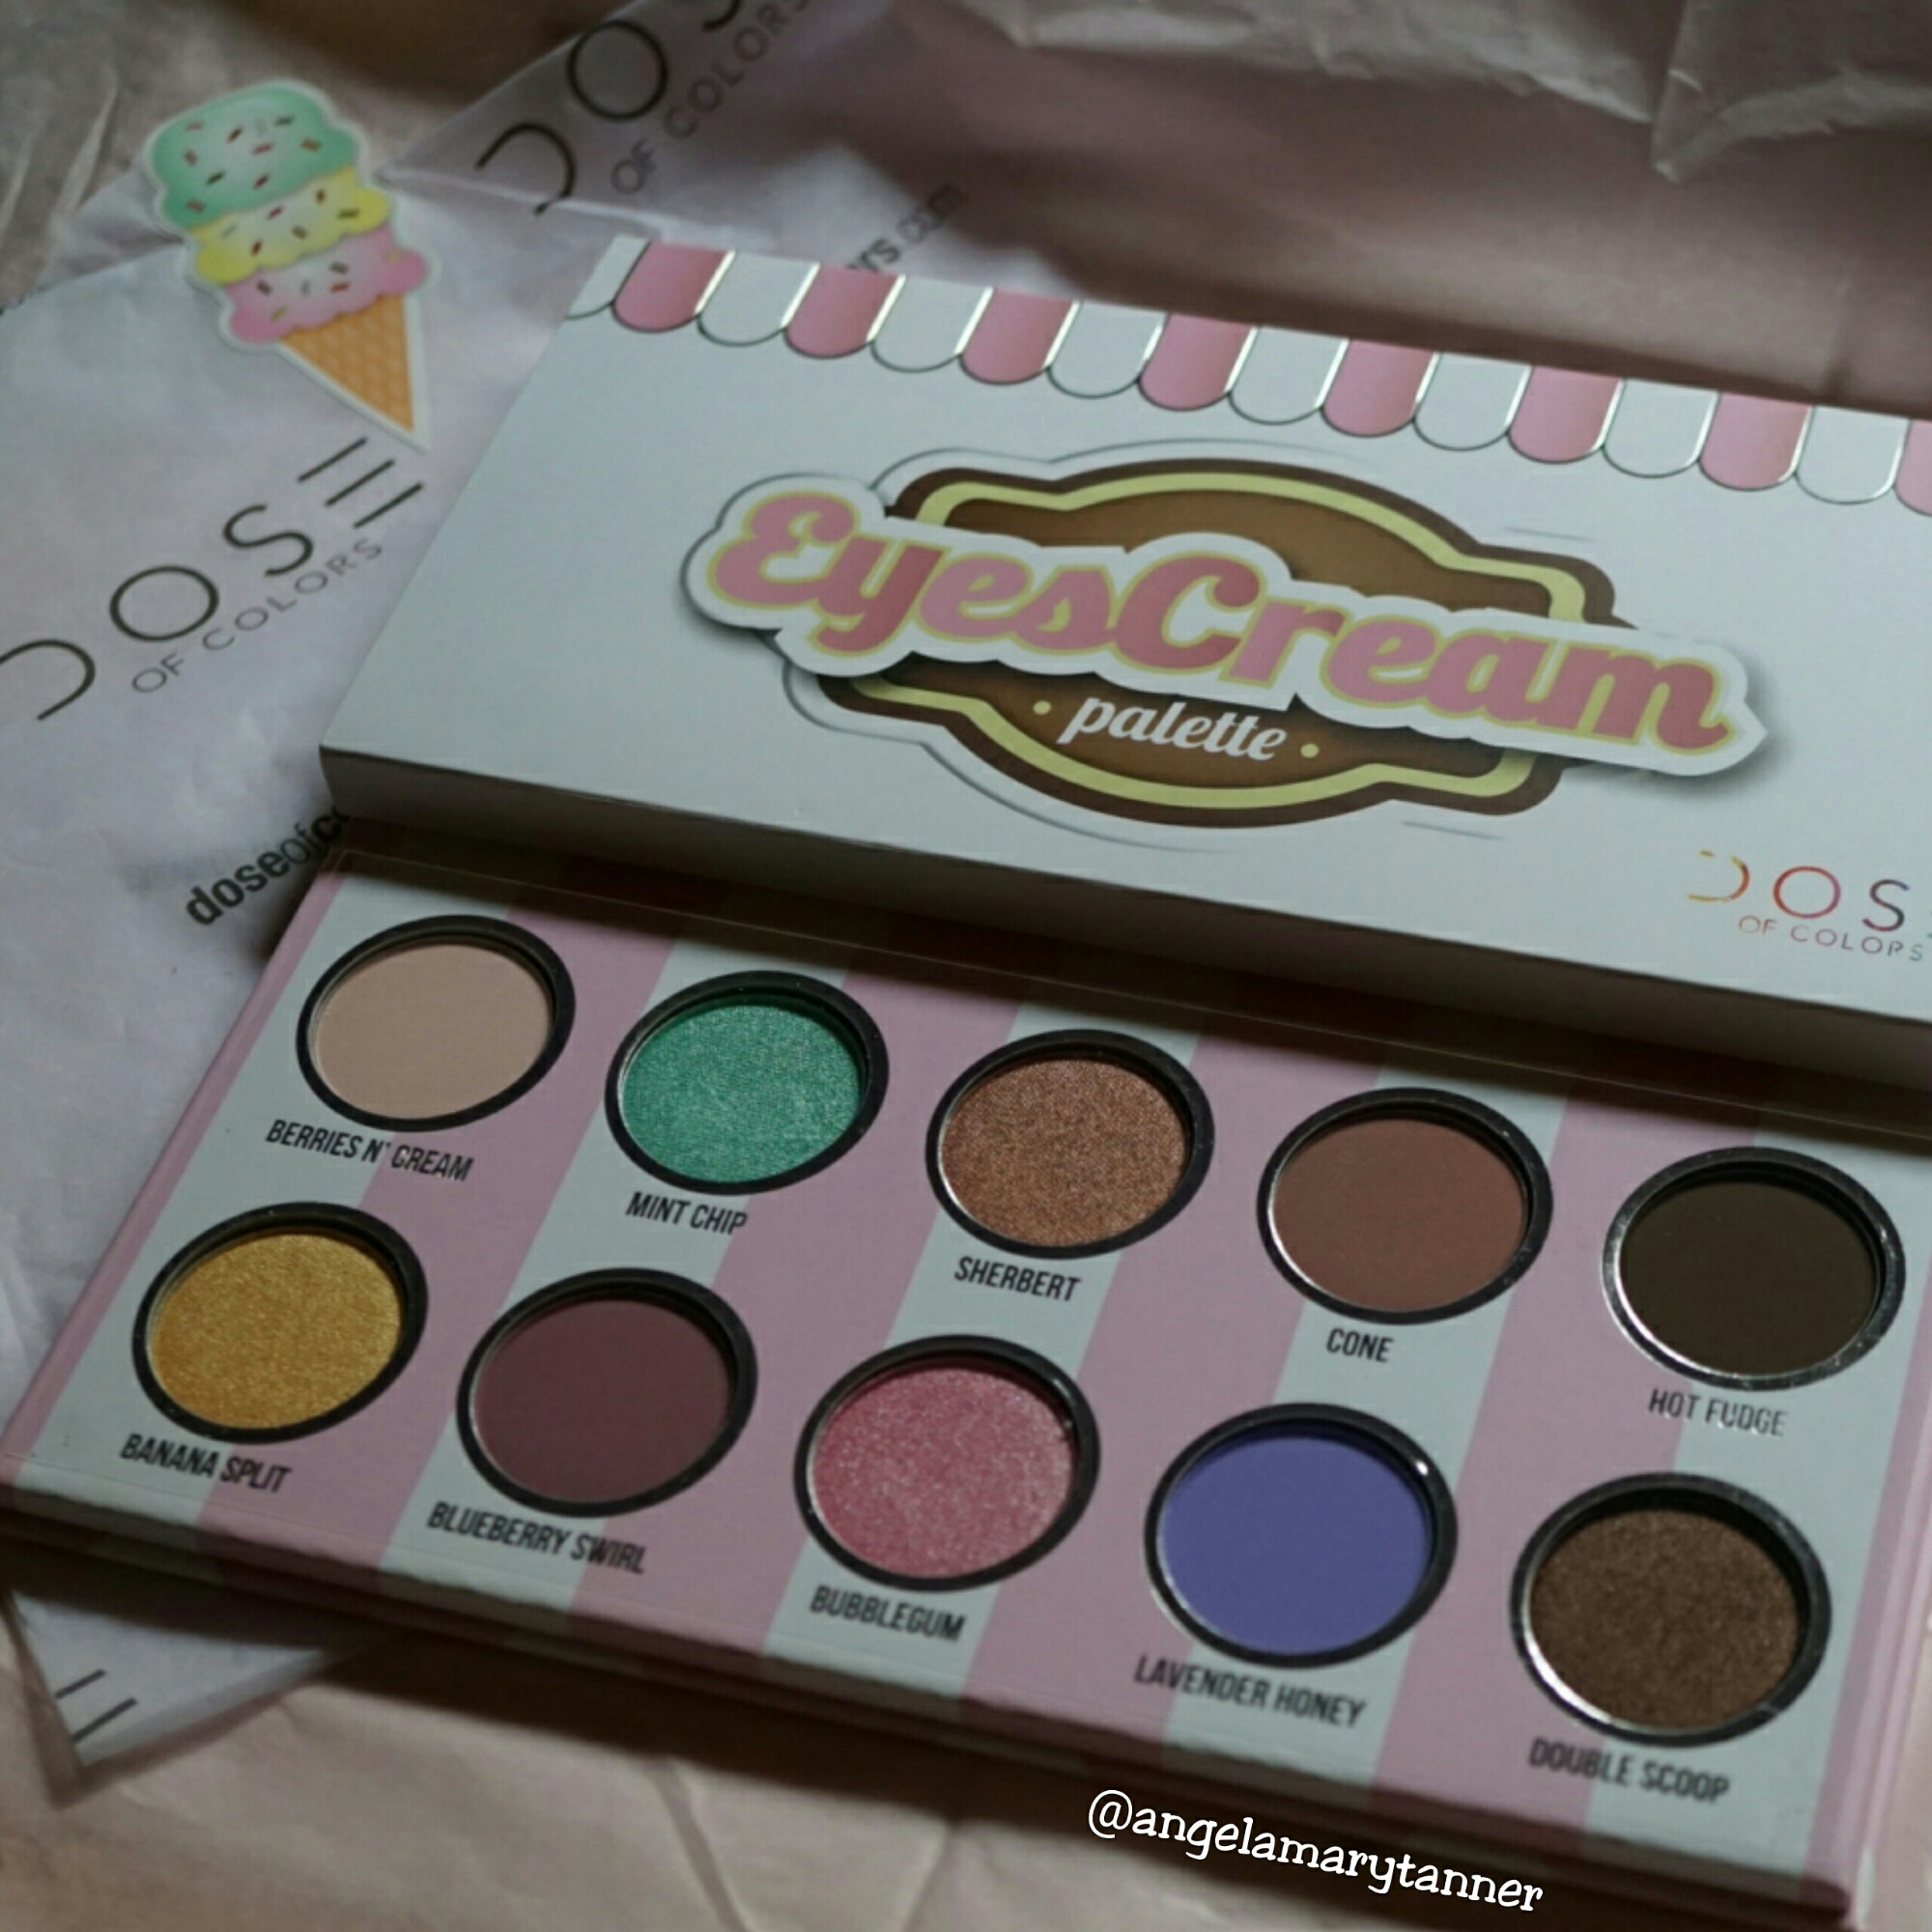 DOSE OF COLORS 'EyesCream' PALETTE: REVIEW AND SWATCHES PART 2 ($50)